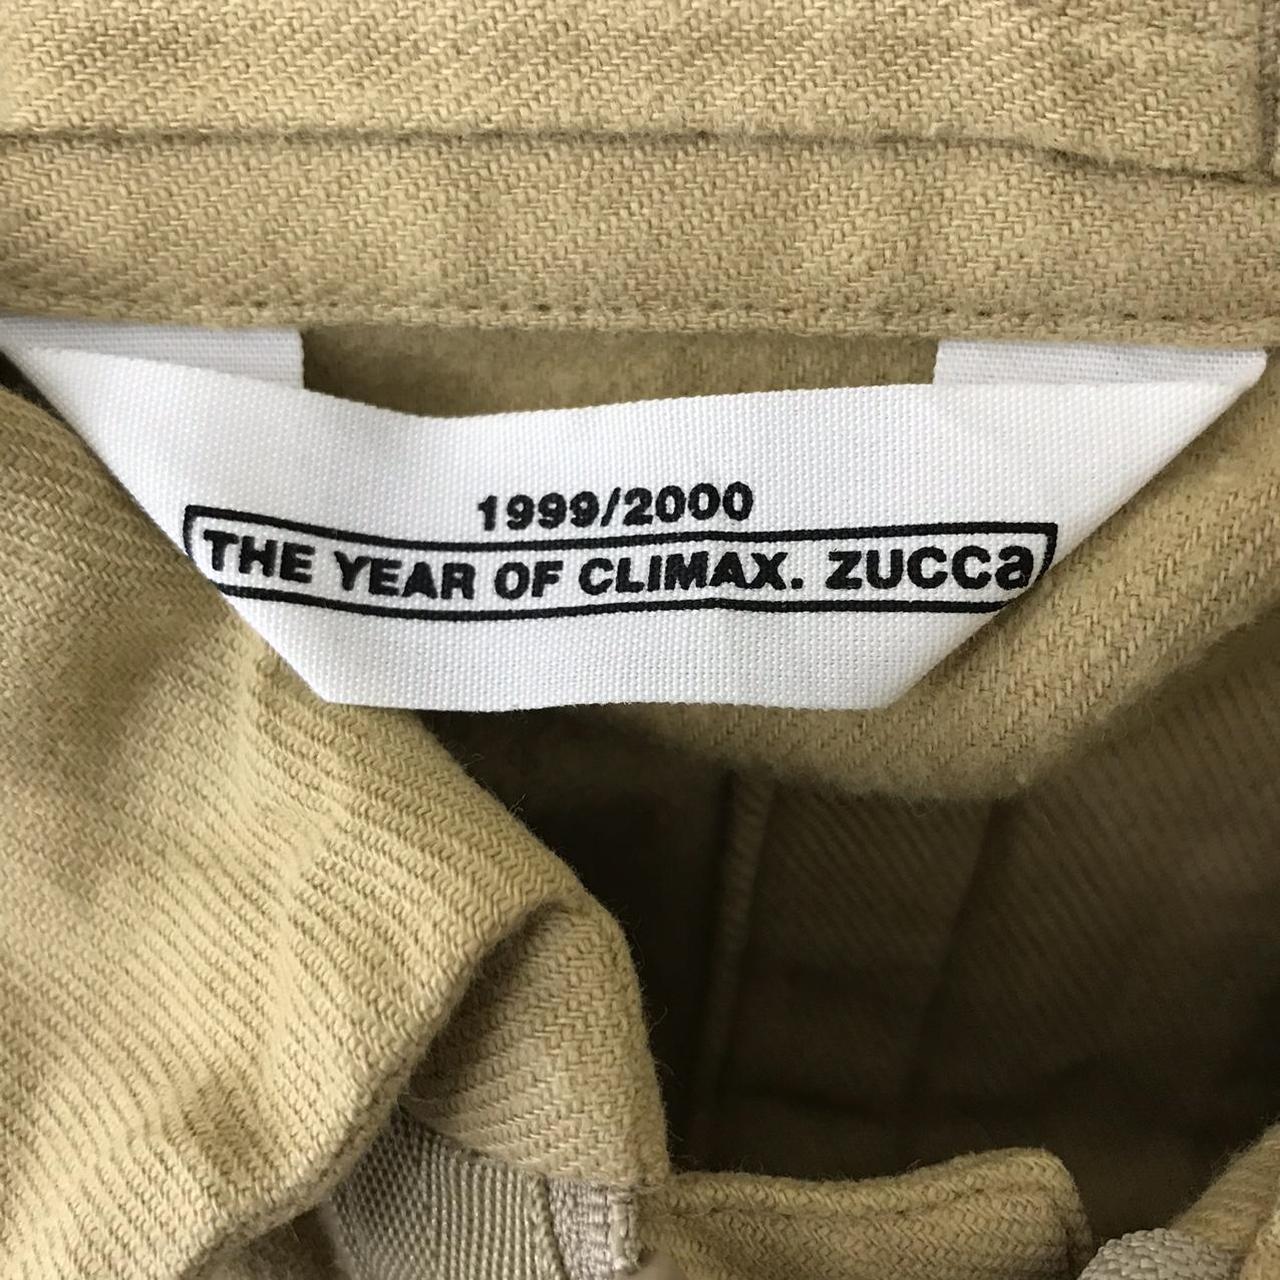 ZUCCA 1999/2000 The Year Of Climax Cabane De Zucca